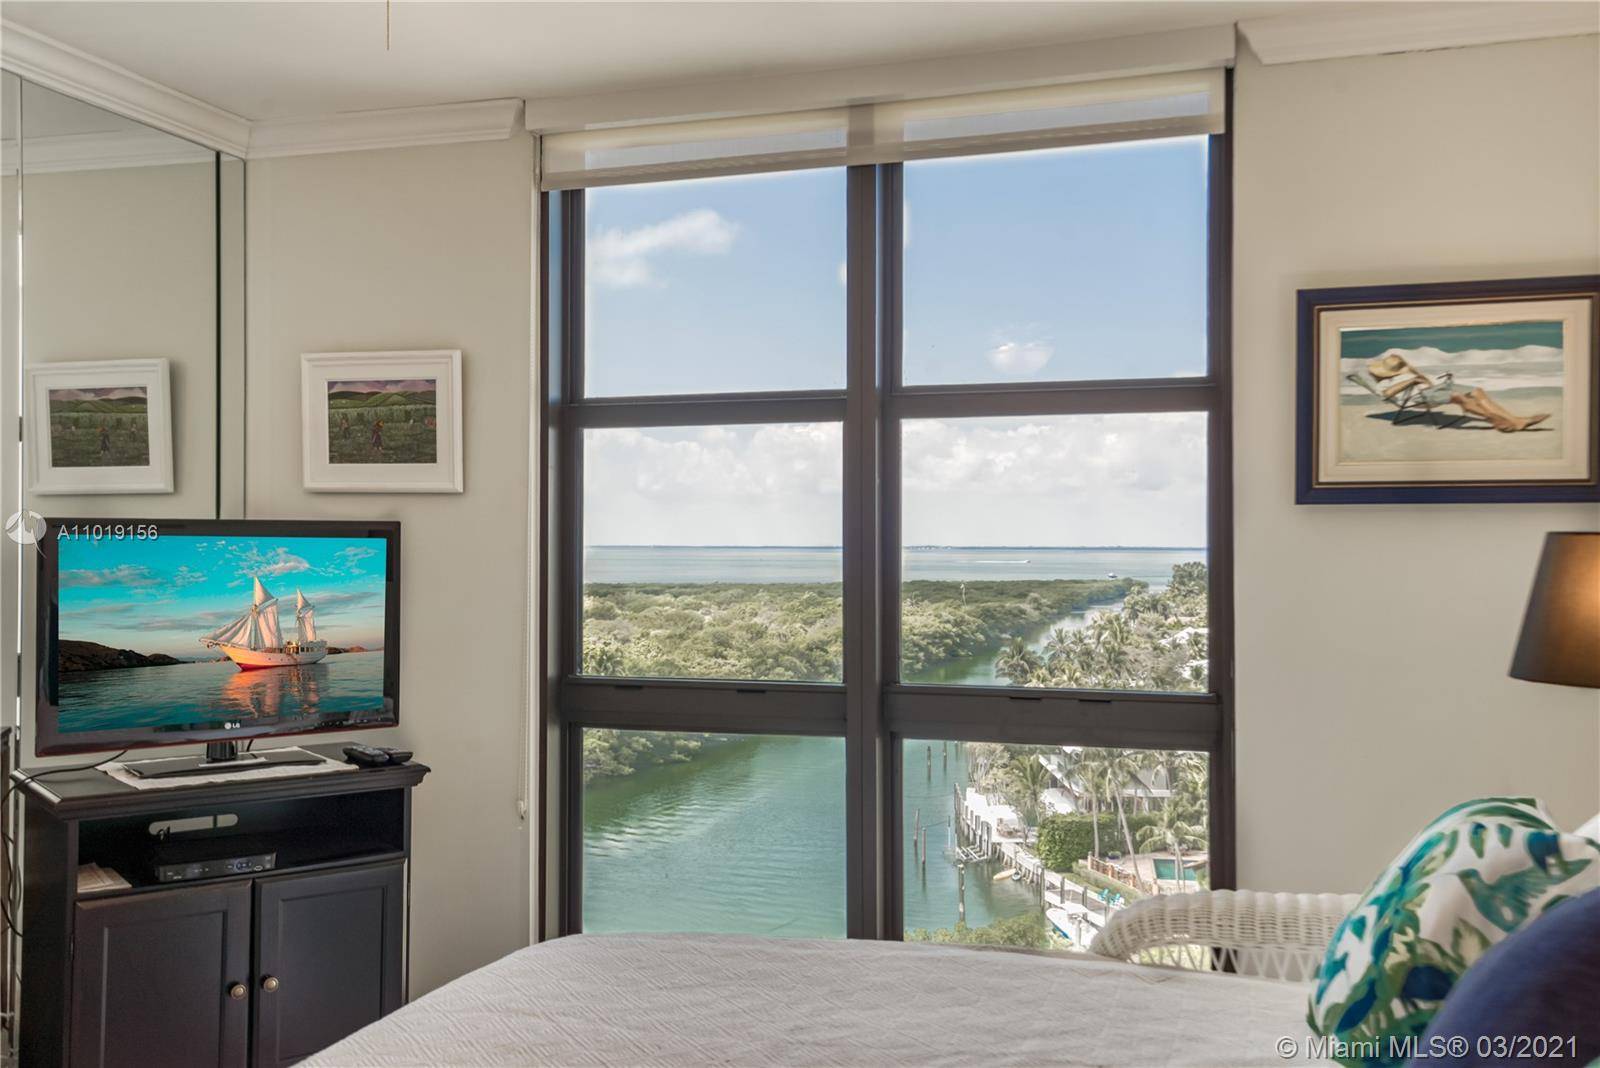 Endless panoramic, 180 degree views of Biscayne bay, Pines canal, Key Biscayne and the Coconut Grove skyline from this spacious and bright corner unit.